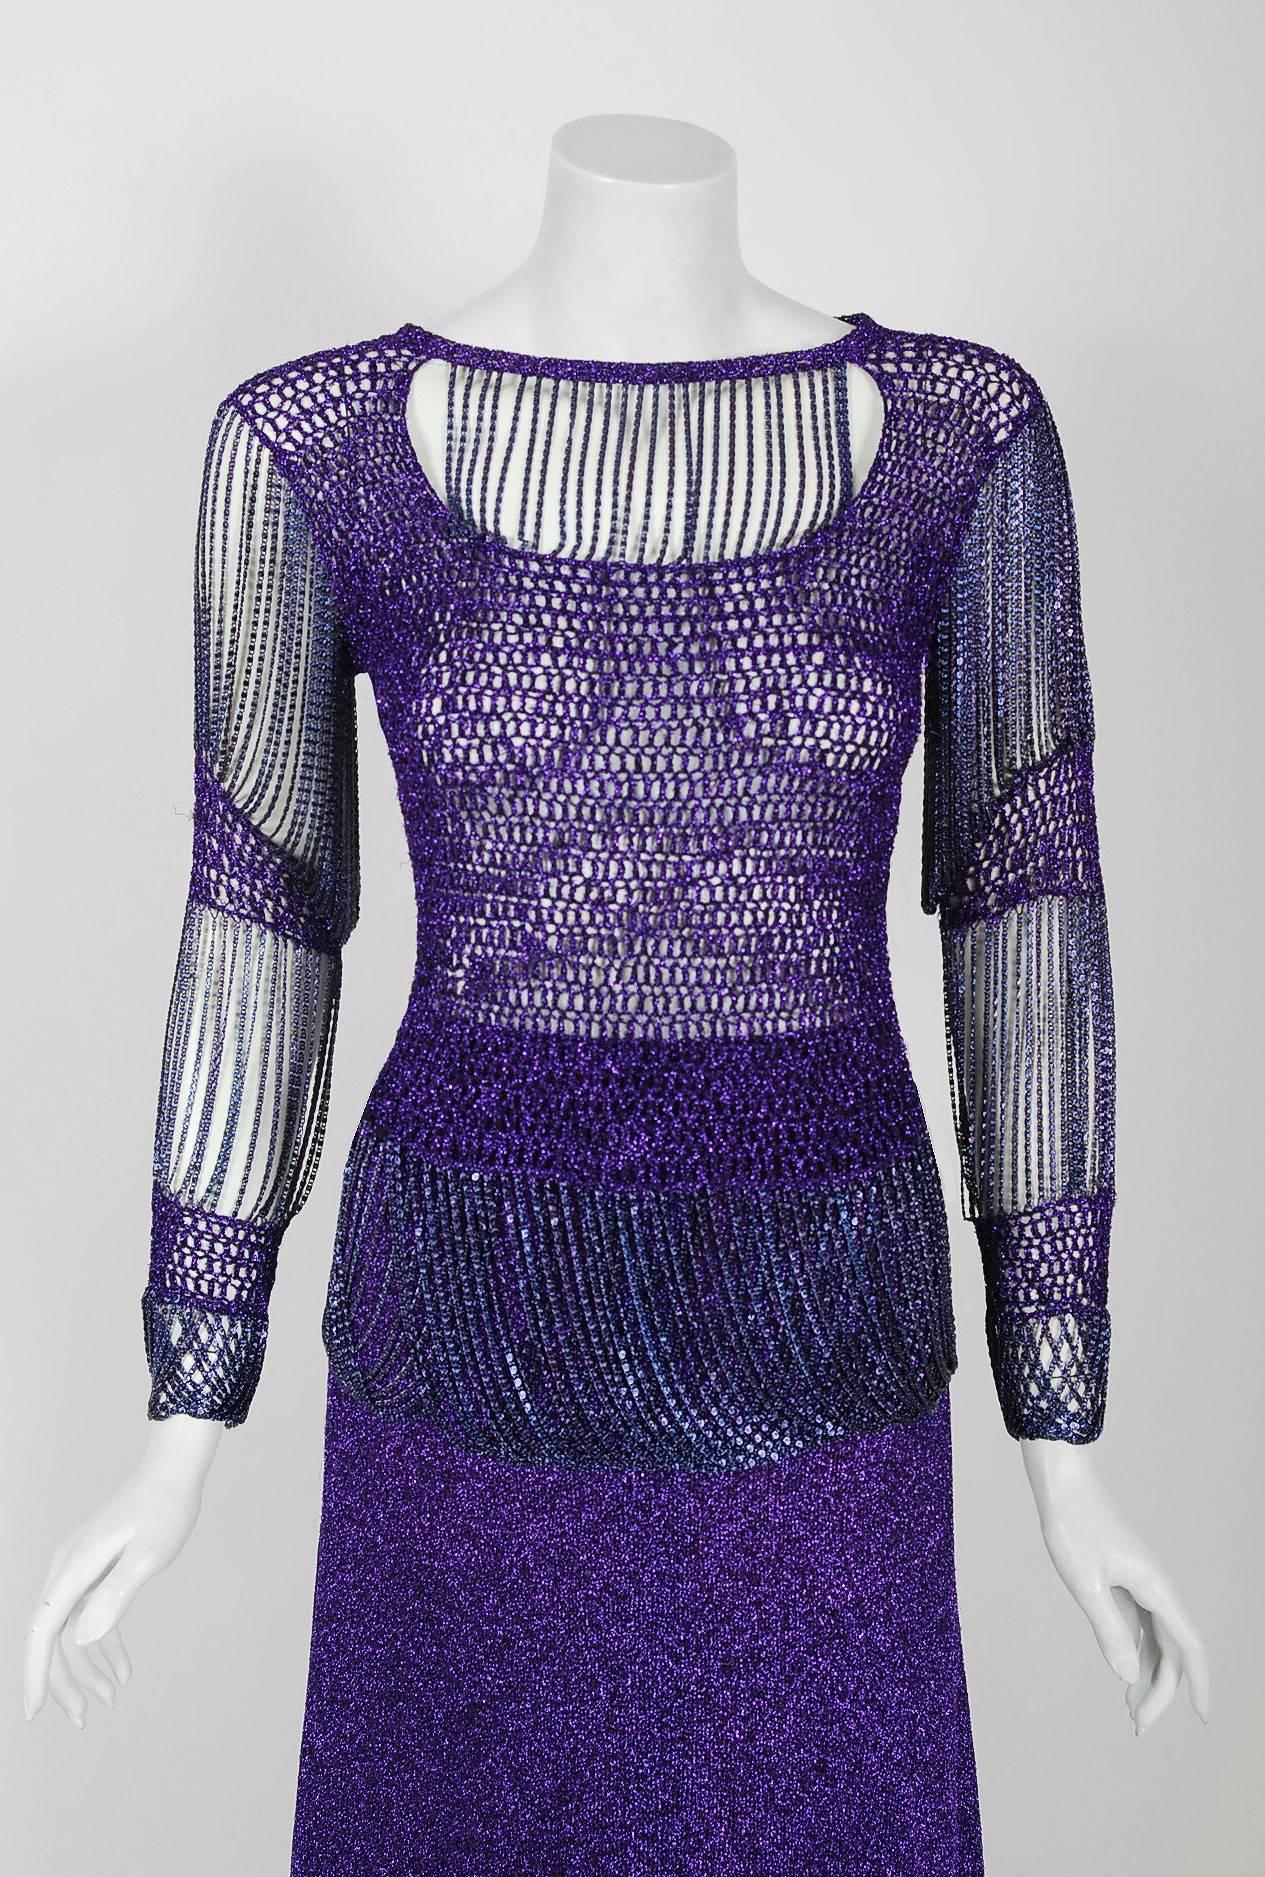 1977 Loris Azzaro Couture Purple Lurex & Chain-Fringe Evening Gown Ensemble  In Excellent Condition In Beverly Hills, CA